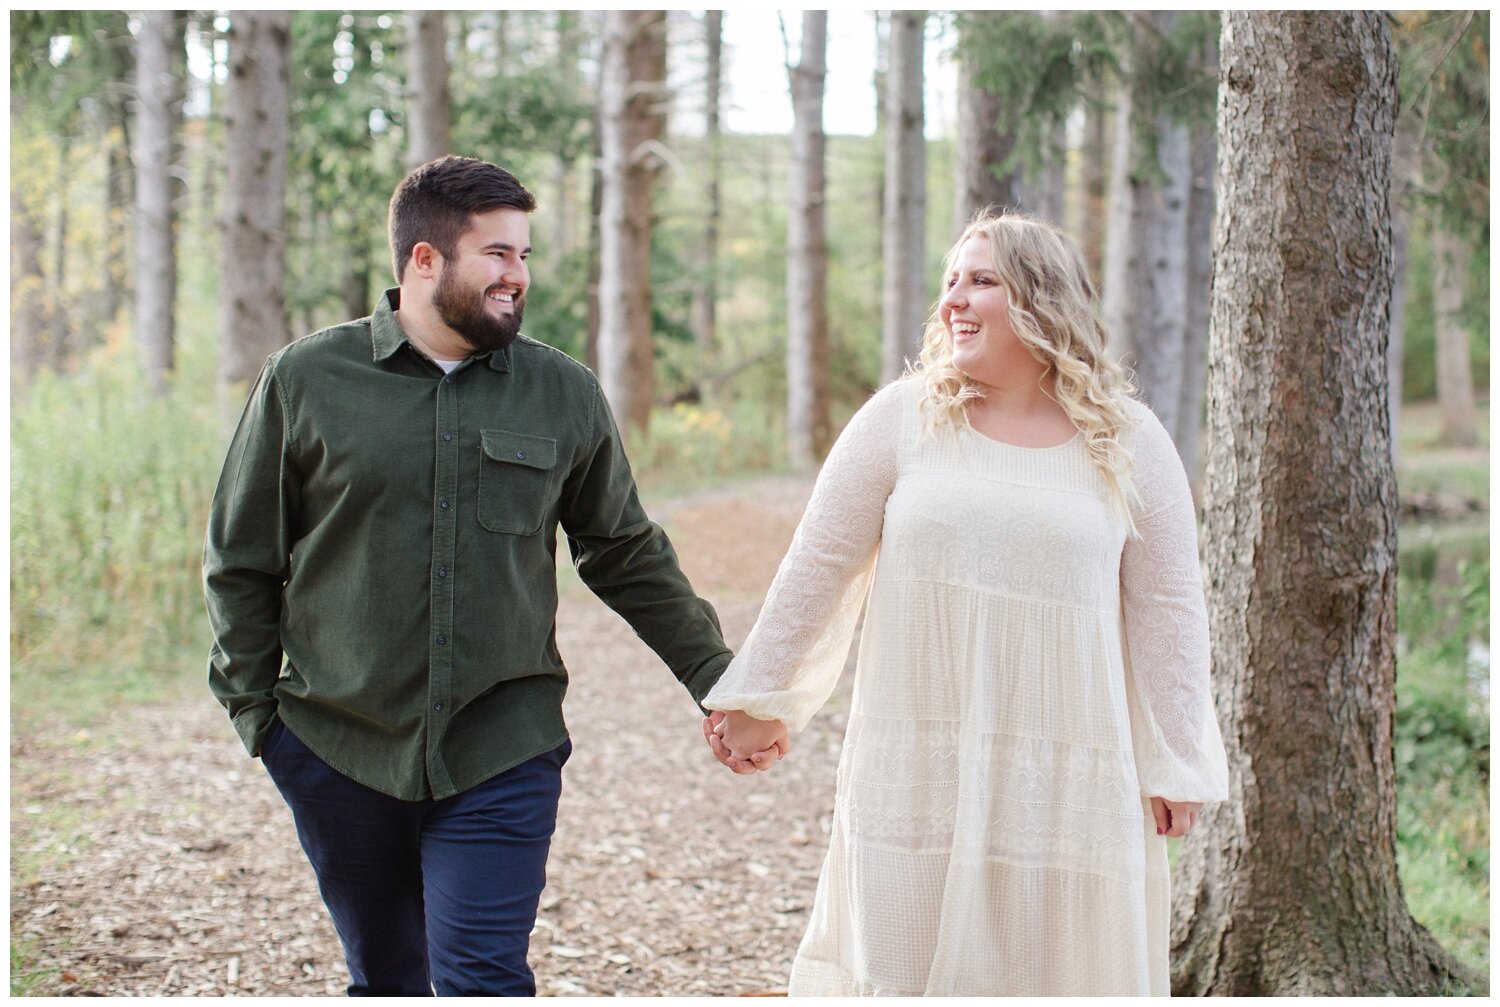 Clarks Summit PA Fall Engagement Session_0012.jpg